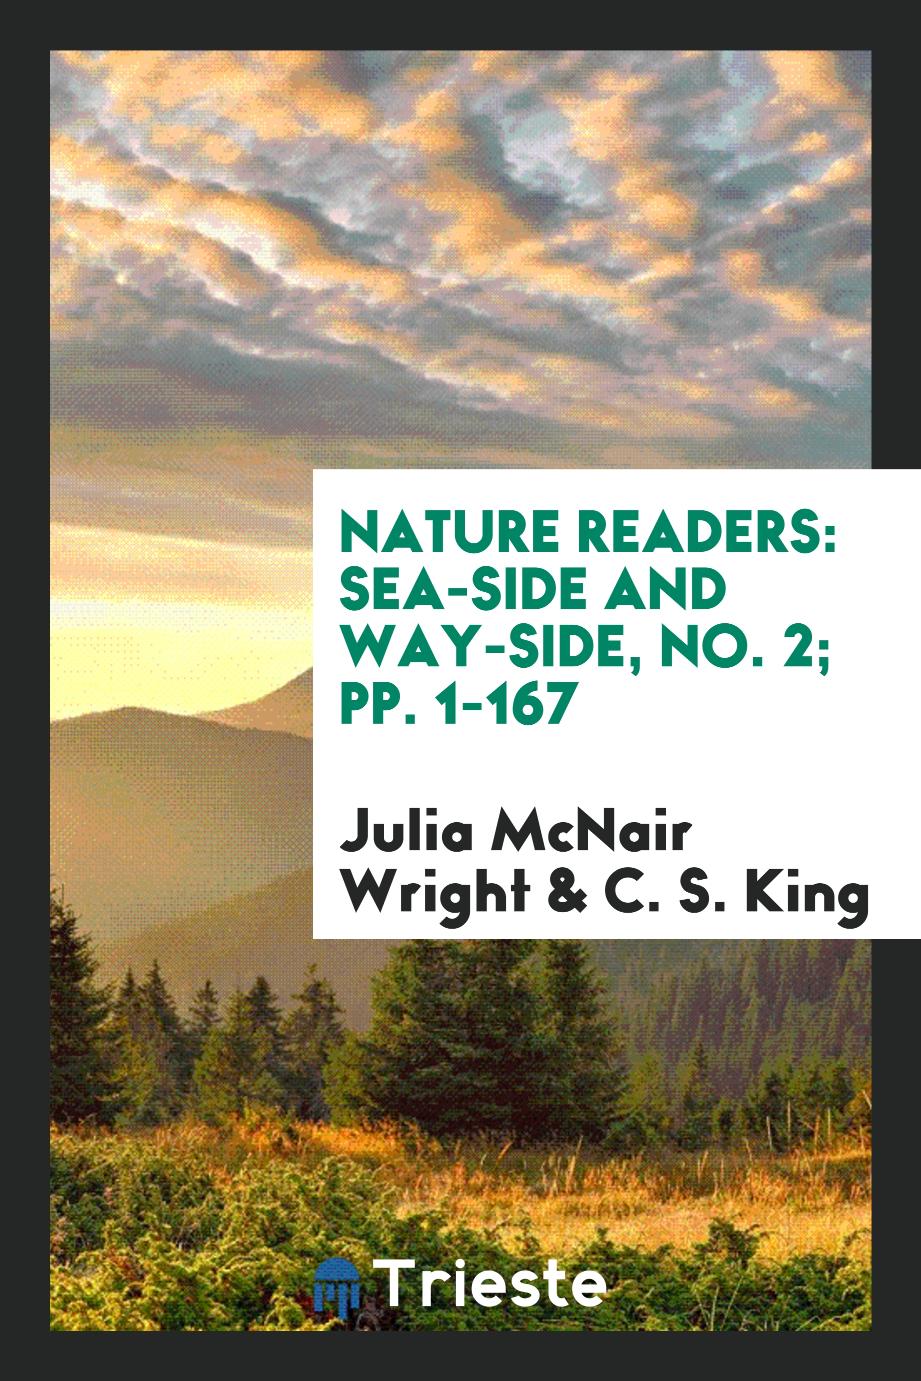 Nature Readers: Sea-Side and Way-Side, No. 2; pp. 1-167